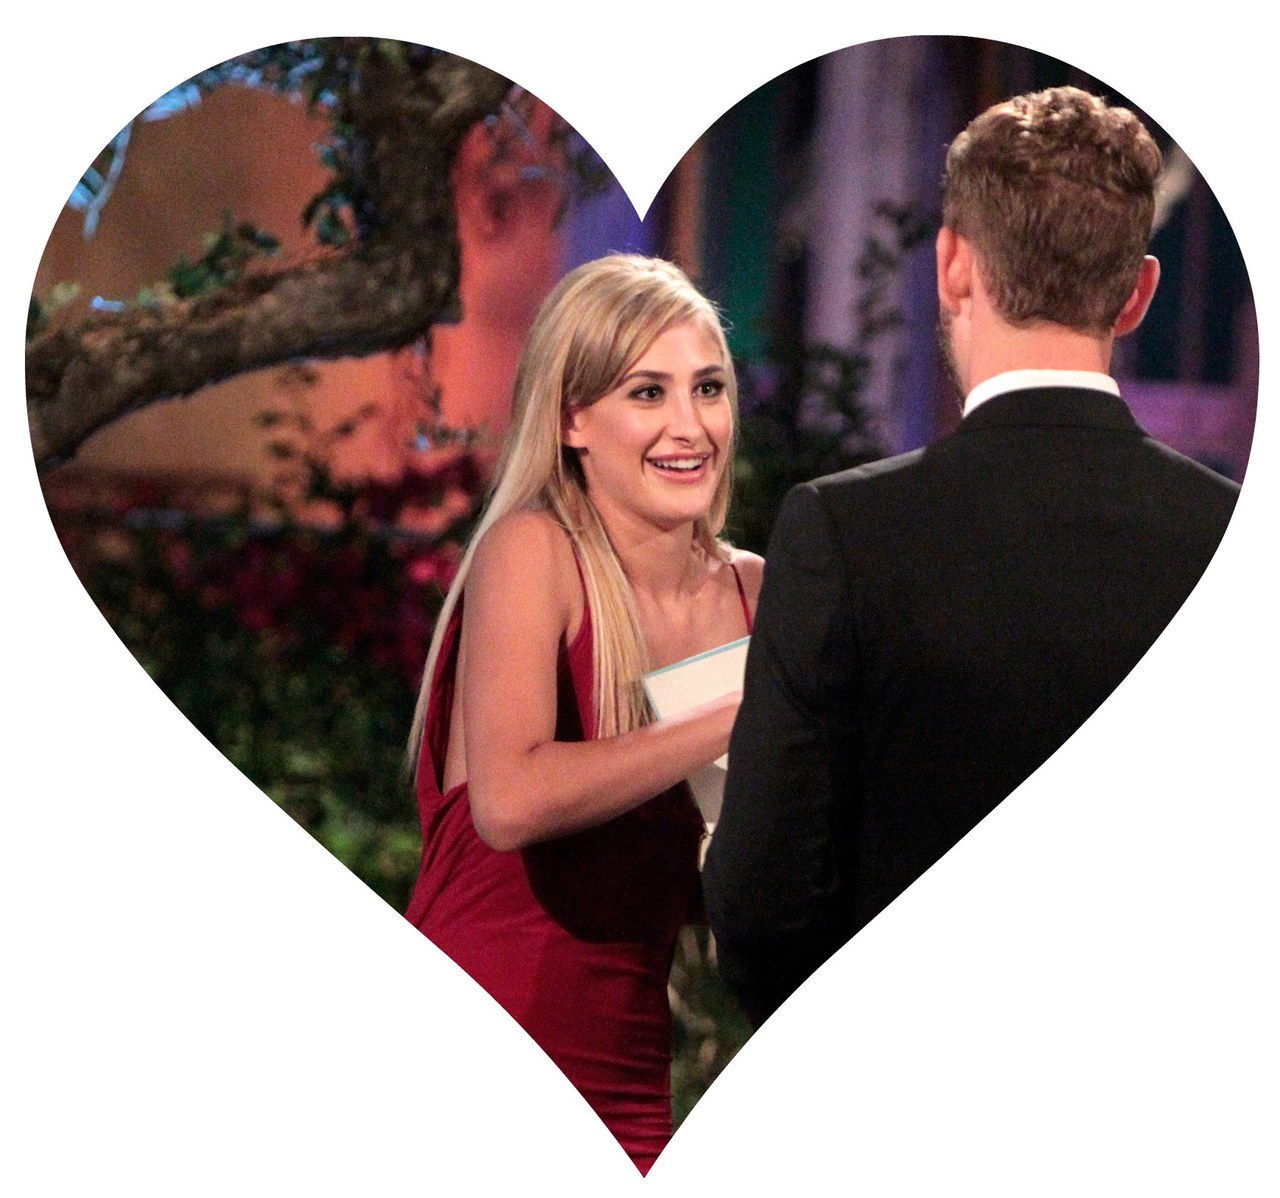 THE BACHELOR - “Episode 2101” - What do a dolphin-loving woman, a successful businesswoman who runs her parents multi-million -dollar flooring empire;, a bachelorette, who is hiding a big secret about her past involving Nick, and a no-nonsense Southern belle, who has Nick in her cross-hairs for a big country wedding, all have in common? They all have their sights set on making the Bachelor, Nick Viall, their future husband when the much-anticipated 21th edition of ABC's hit romance reality series, 